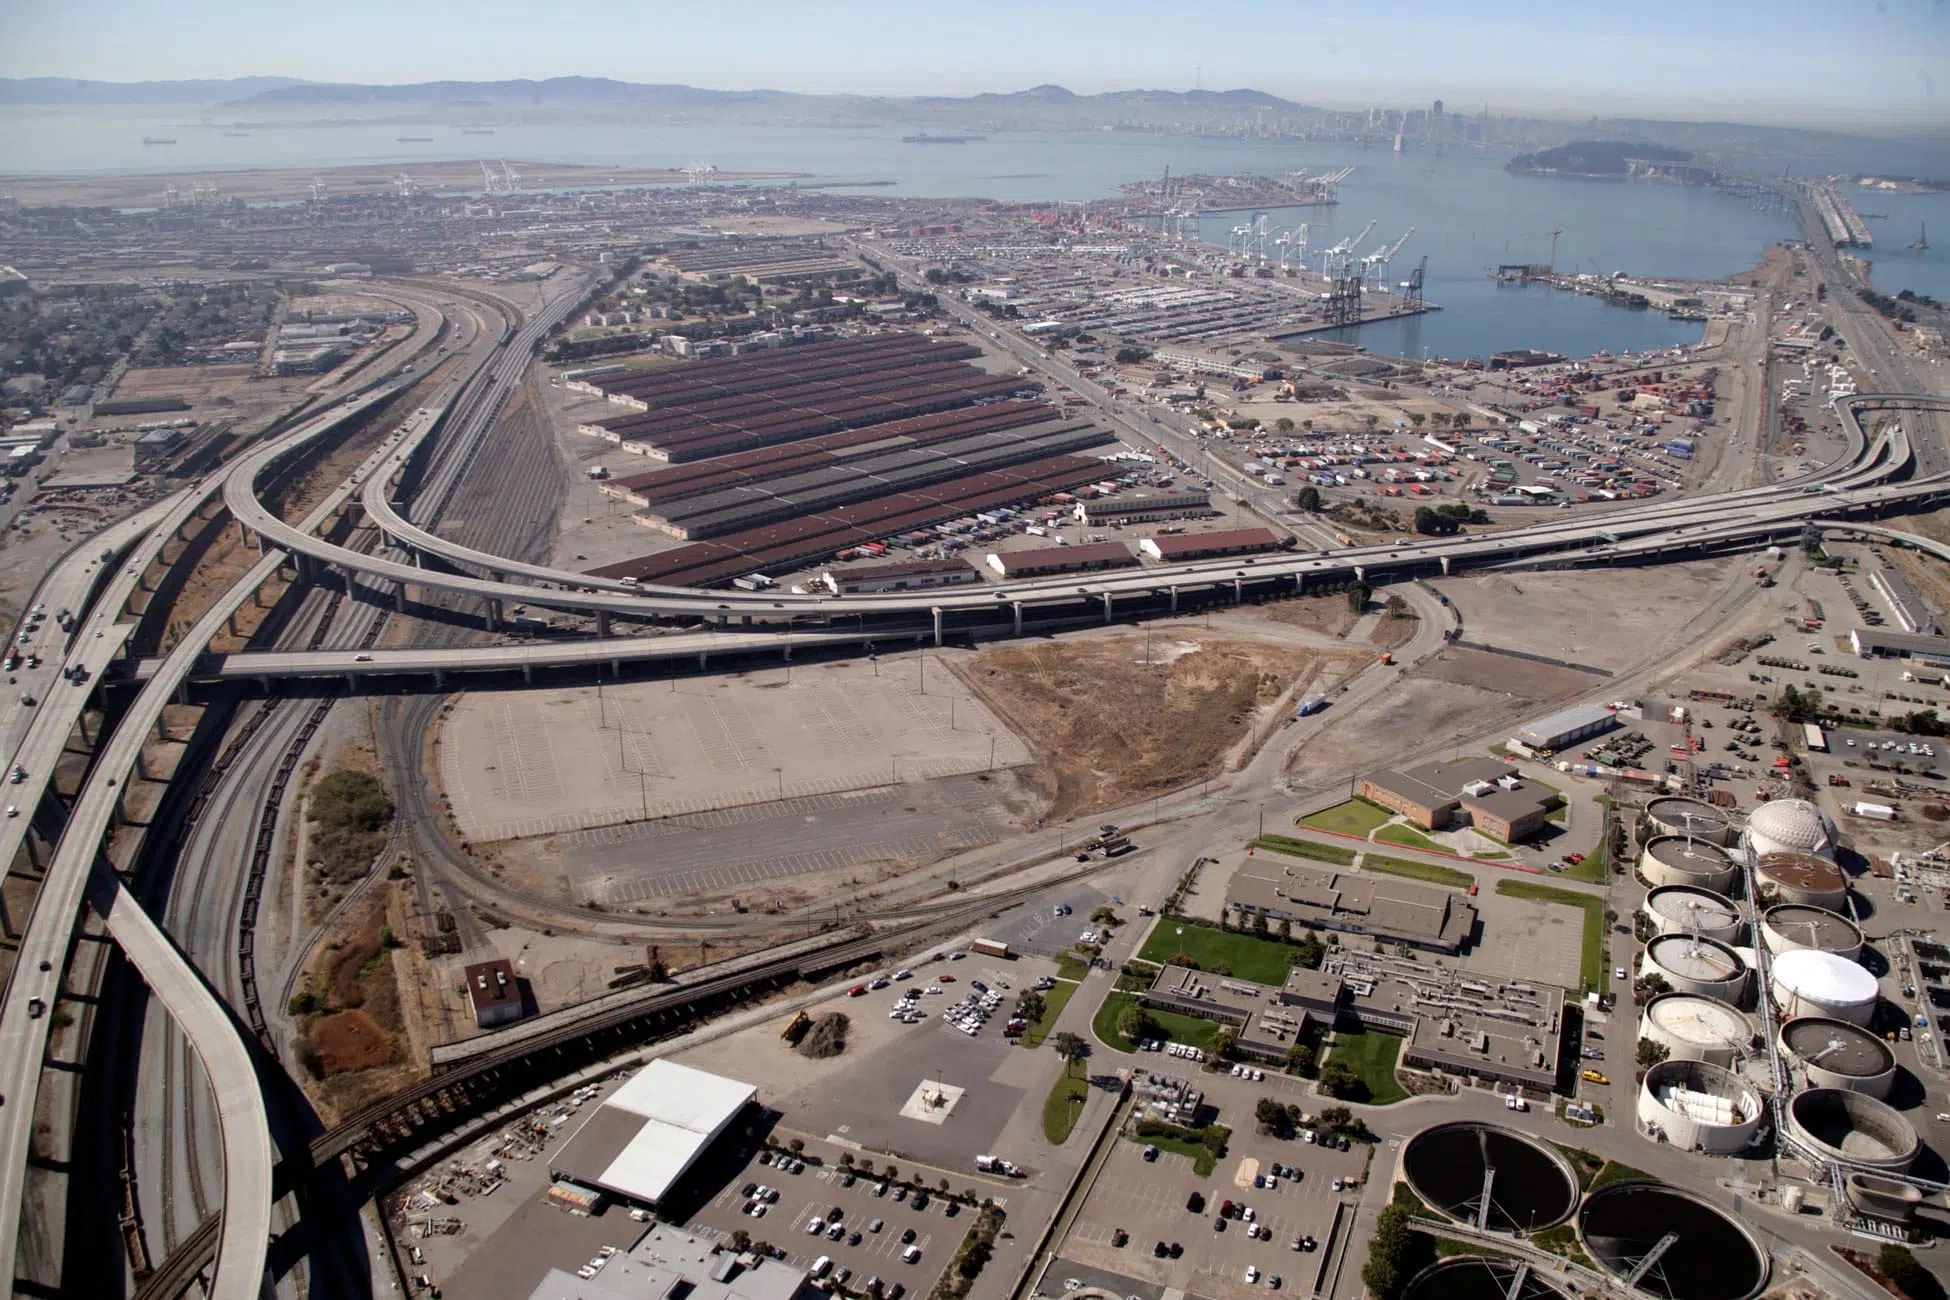 Kimley-Horn provided infrastructure design and engineering management services in support of pre-development activities for the Oakland Army Base.